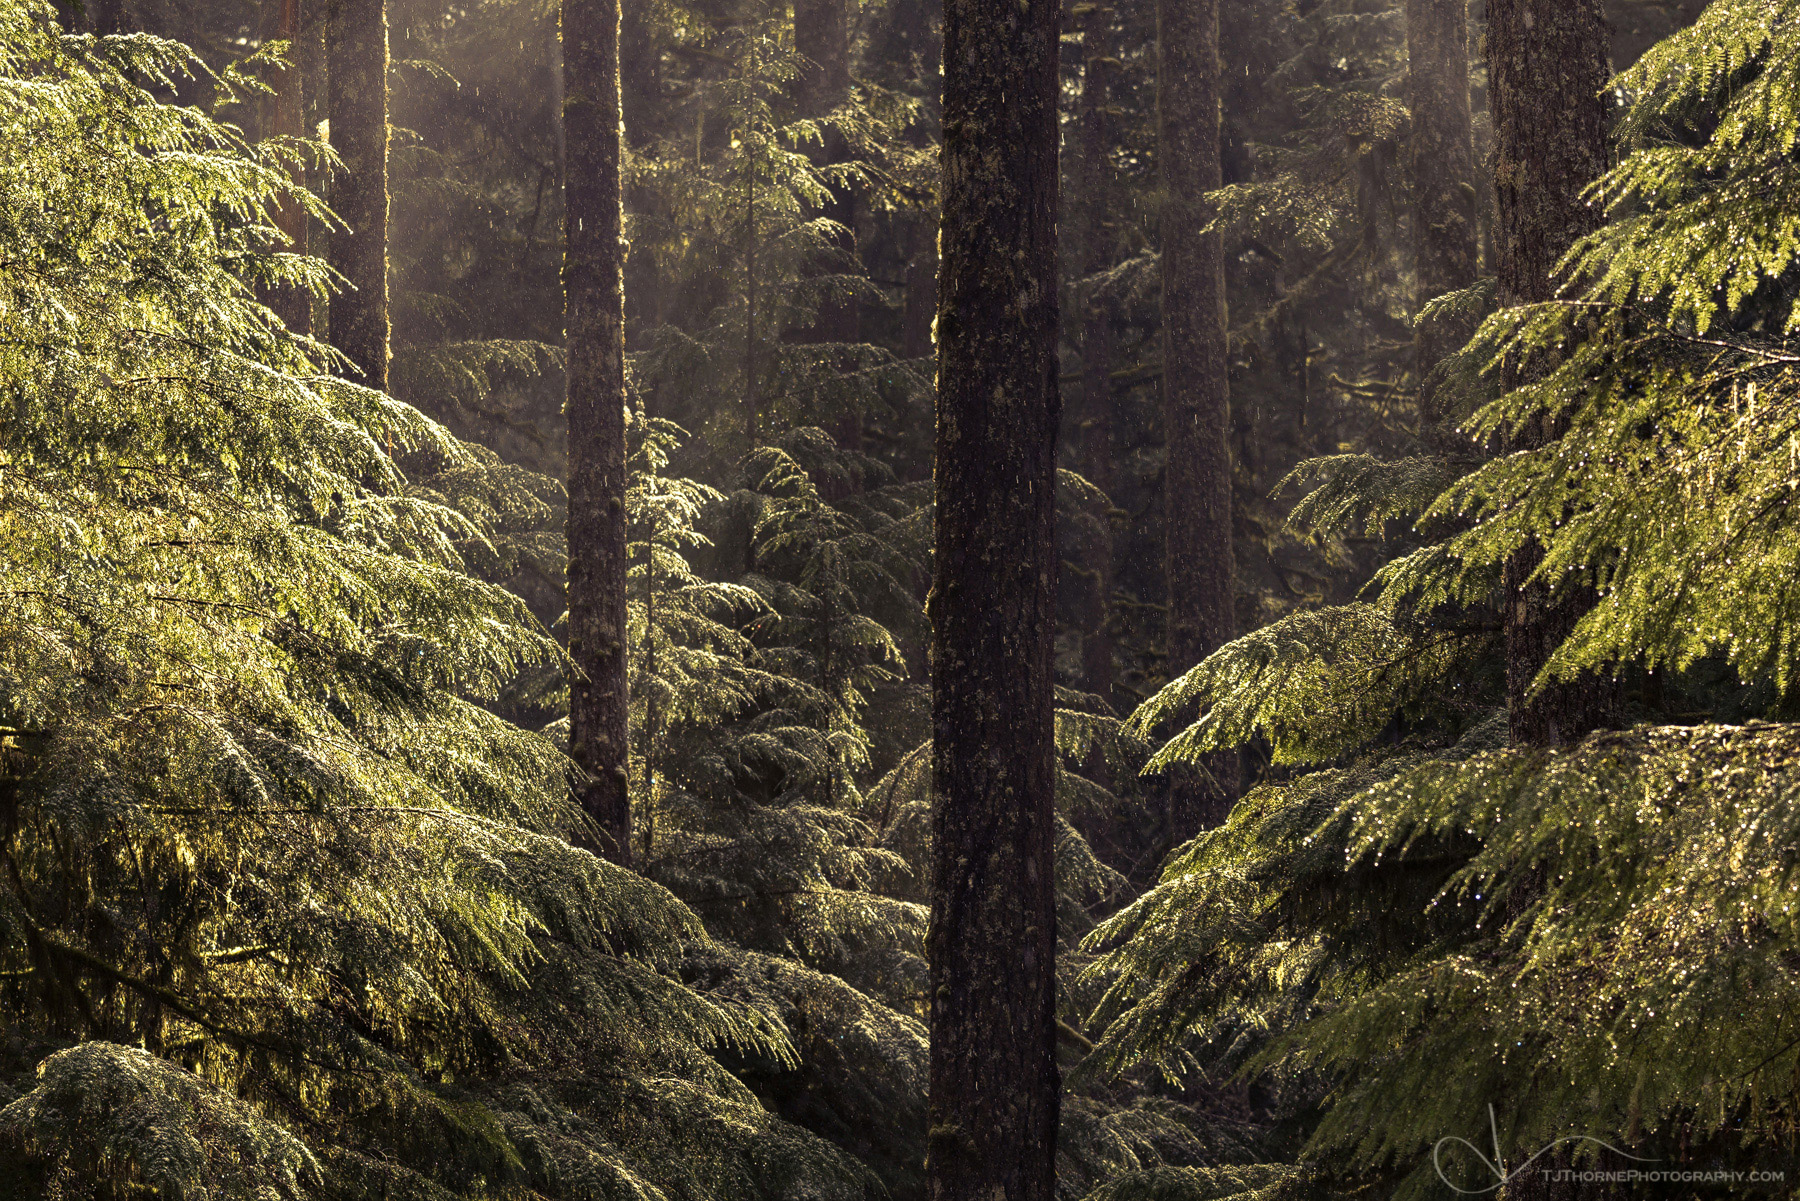 Morning light melts and backlights trees covered in frozen dew in an Oregon forest.